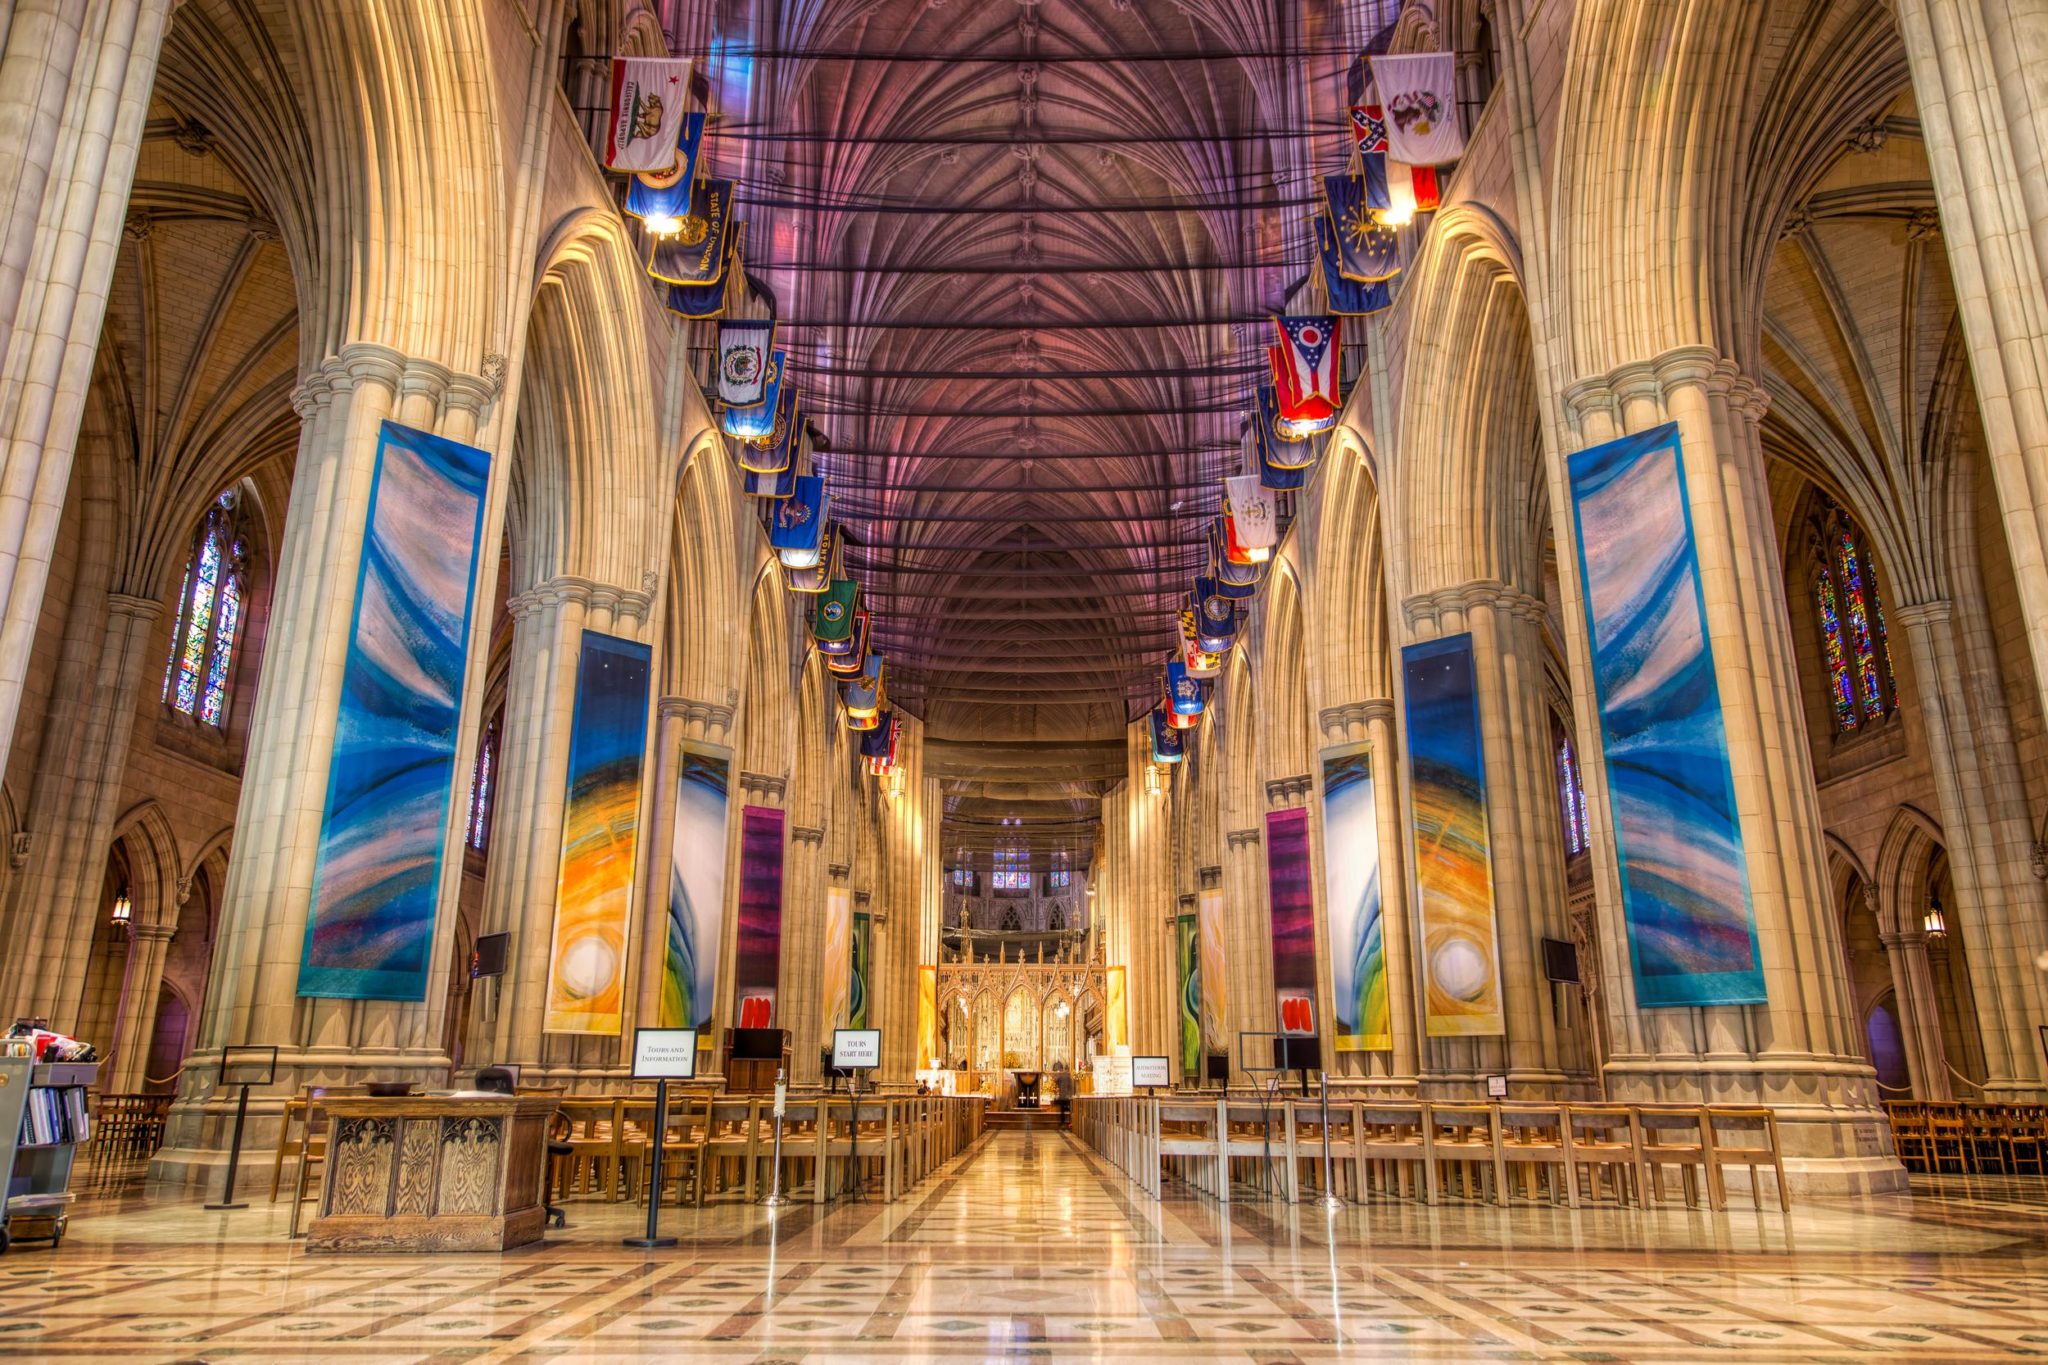 tour the national cathedral in washington dc